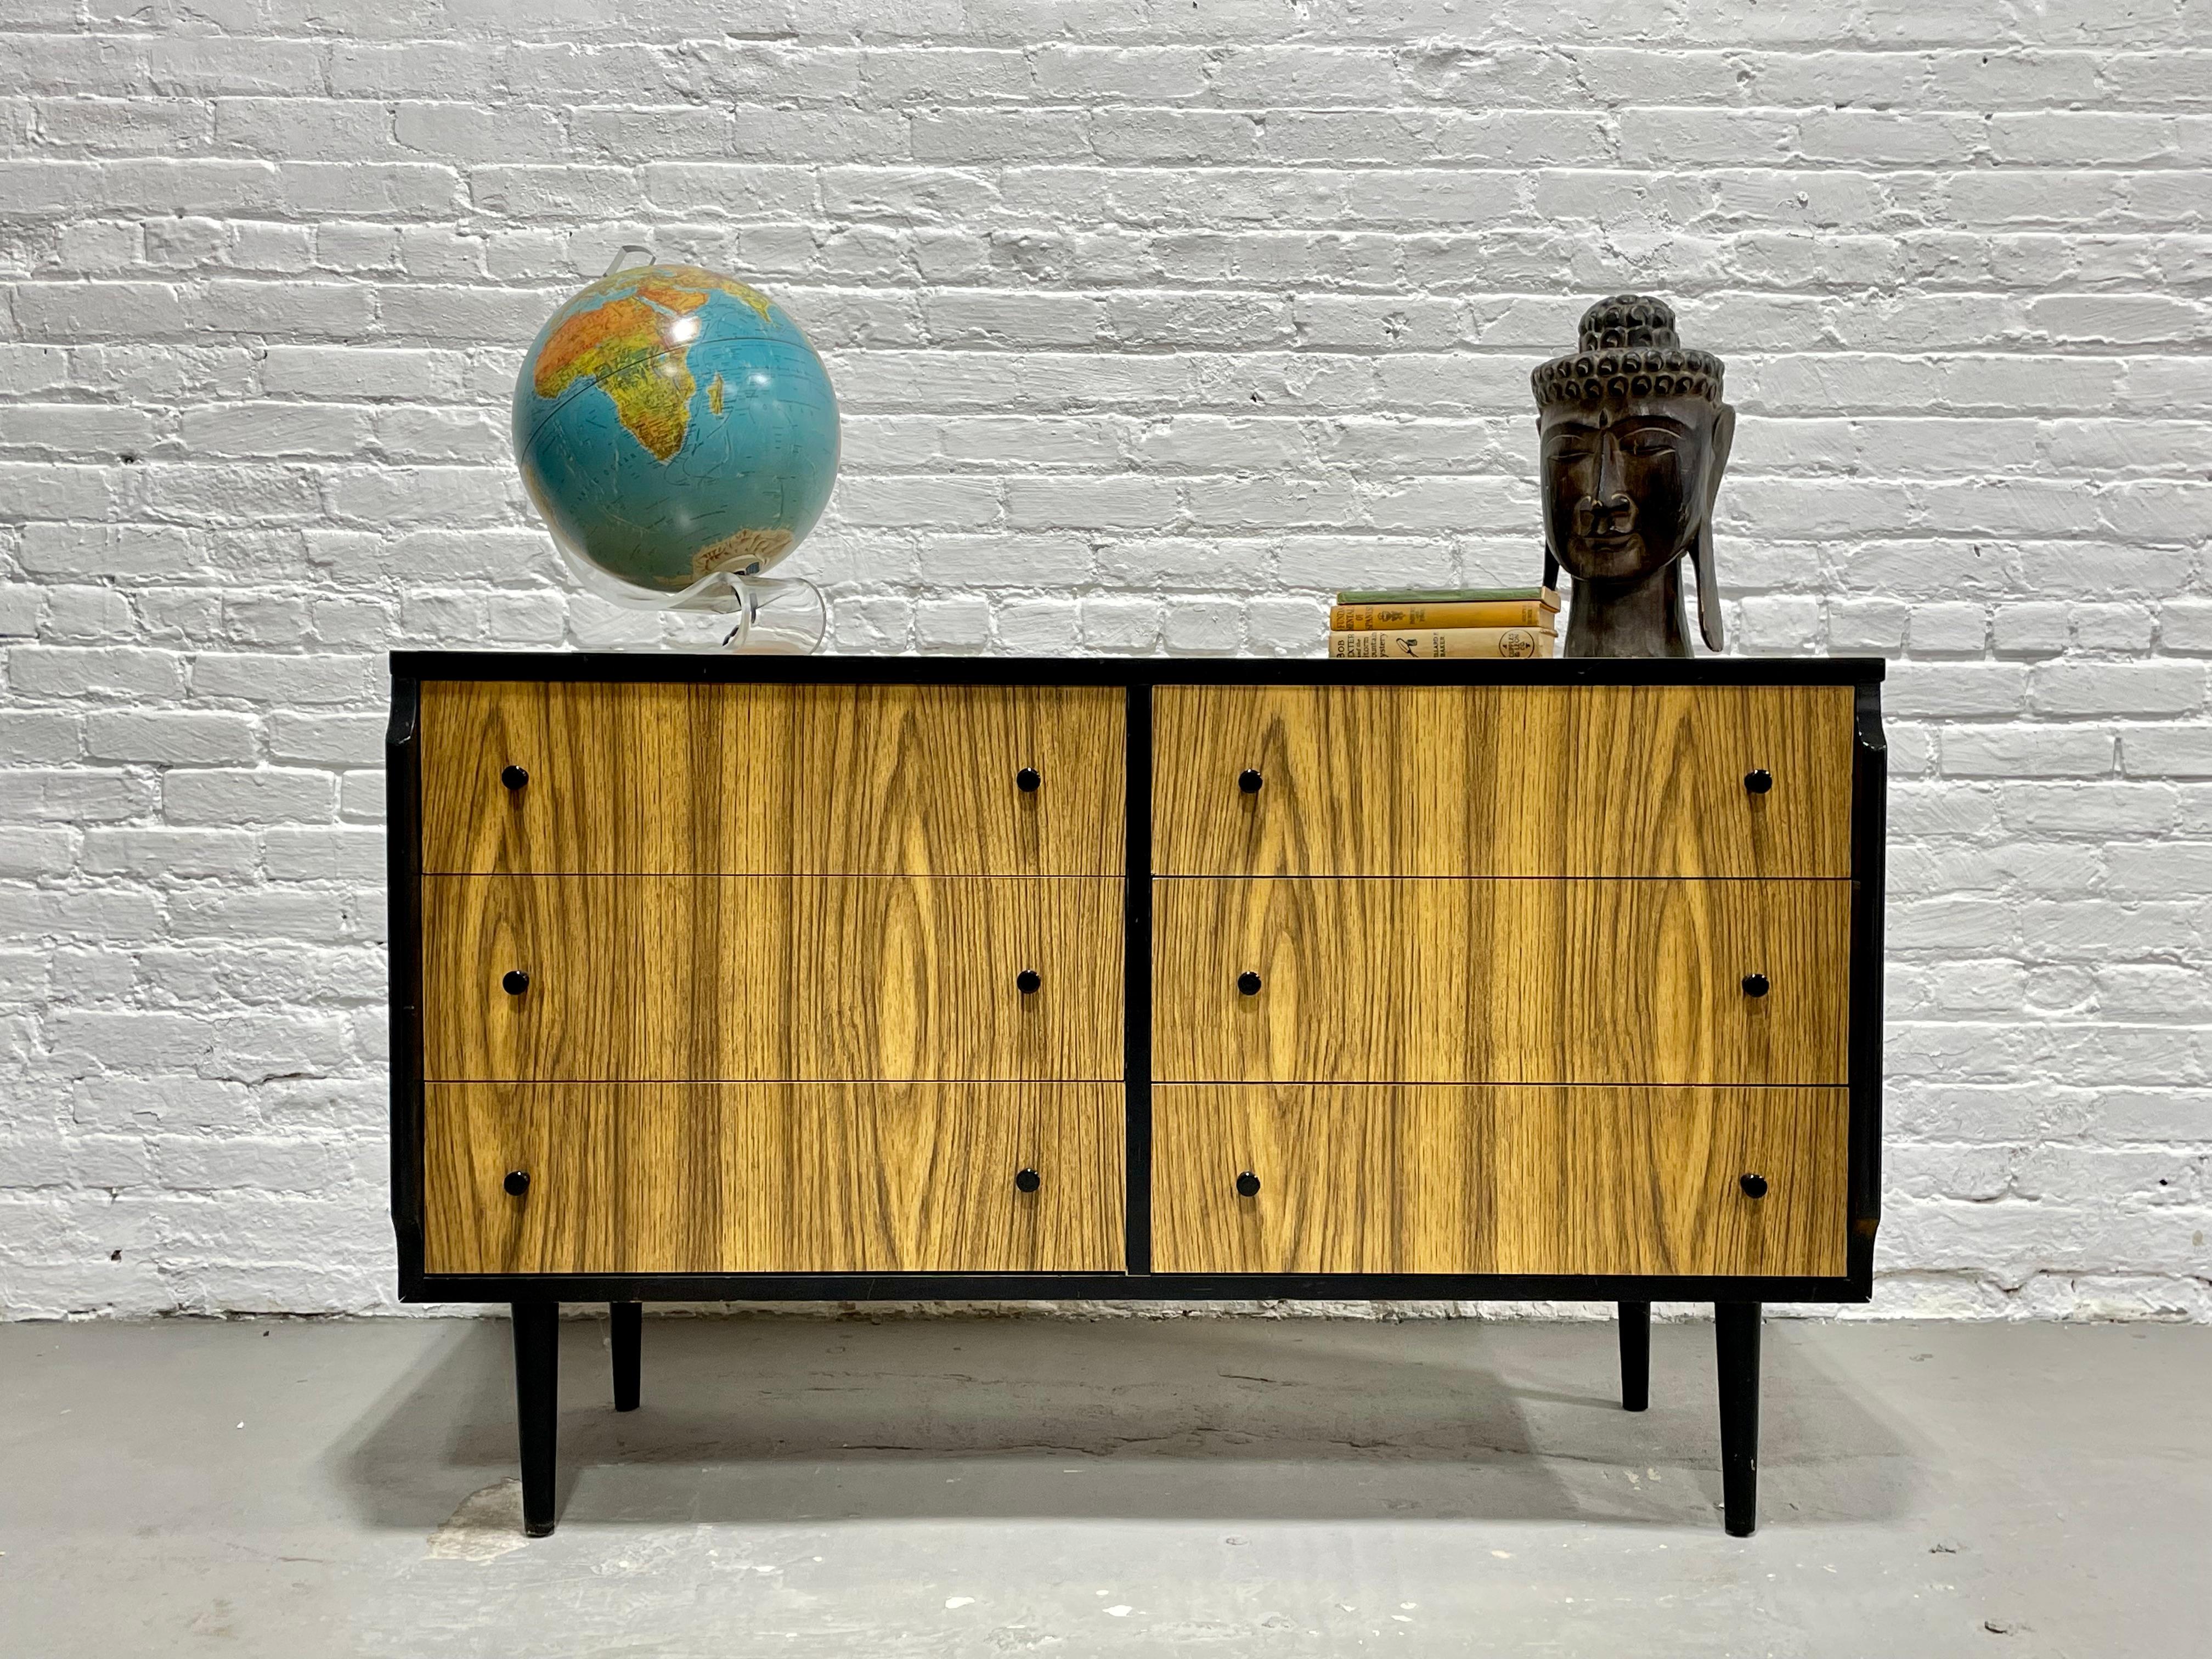 Mid-Century Modern Credenza / Long Dresser by Kent Coffey’s Teakway Line, a super fun ebonized and laminated design. The dresser is made of solid wood with woodgrain laminate over the top and drawer fronts. The dresser has six deep and spacious